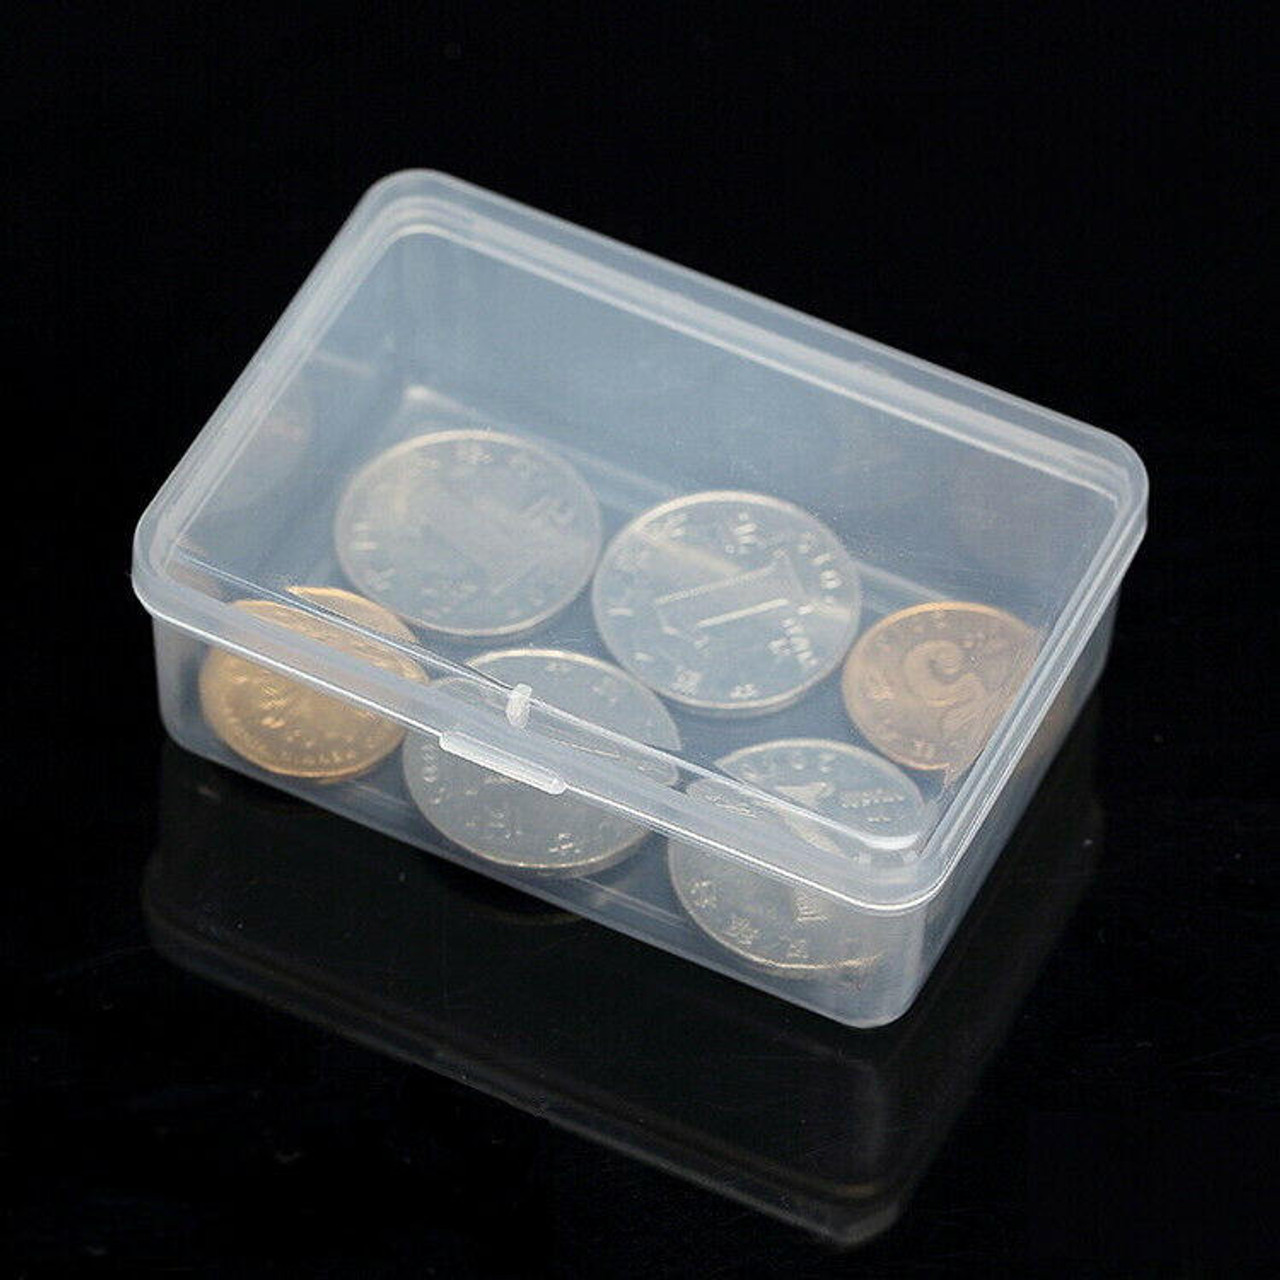 https://cdn11.bigcommerce.com/s-zrh8tkpr8d/images/stencil/1280x1280/products/10027/30480/4pcs-small-plastic-storage-container-boxes-box-diy-coins-screws-jewelry-travel__41981.1681991589.jpg?c=2&imbypass=on